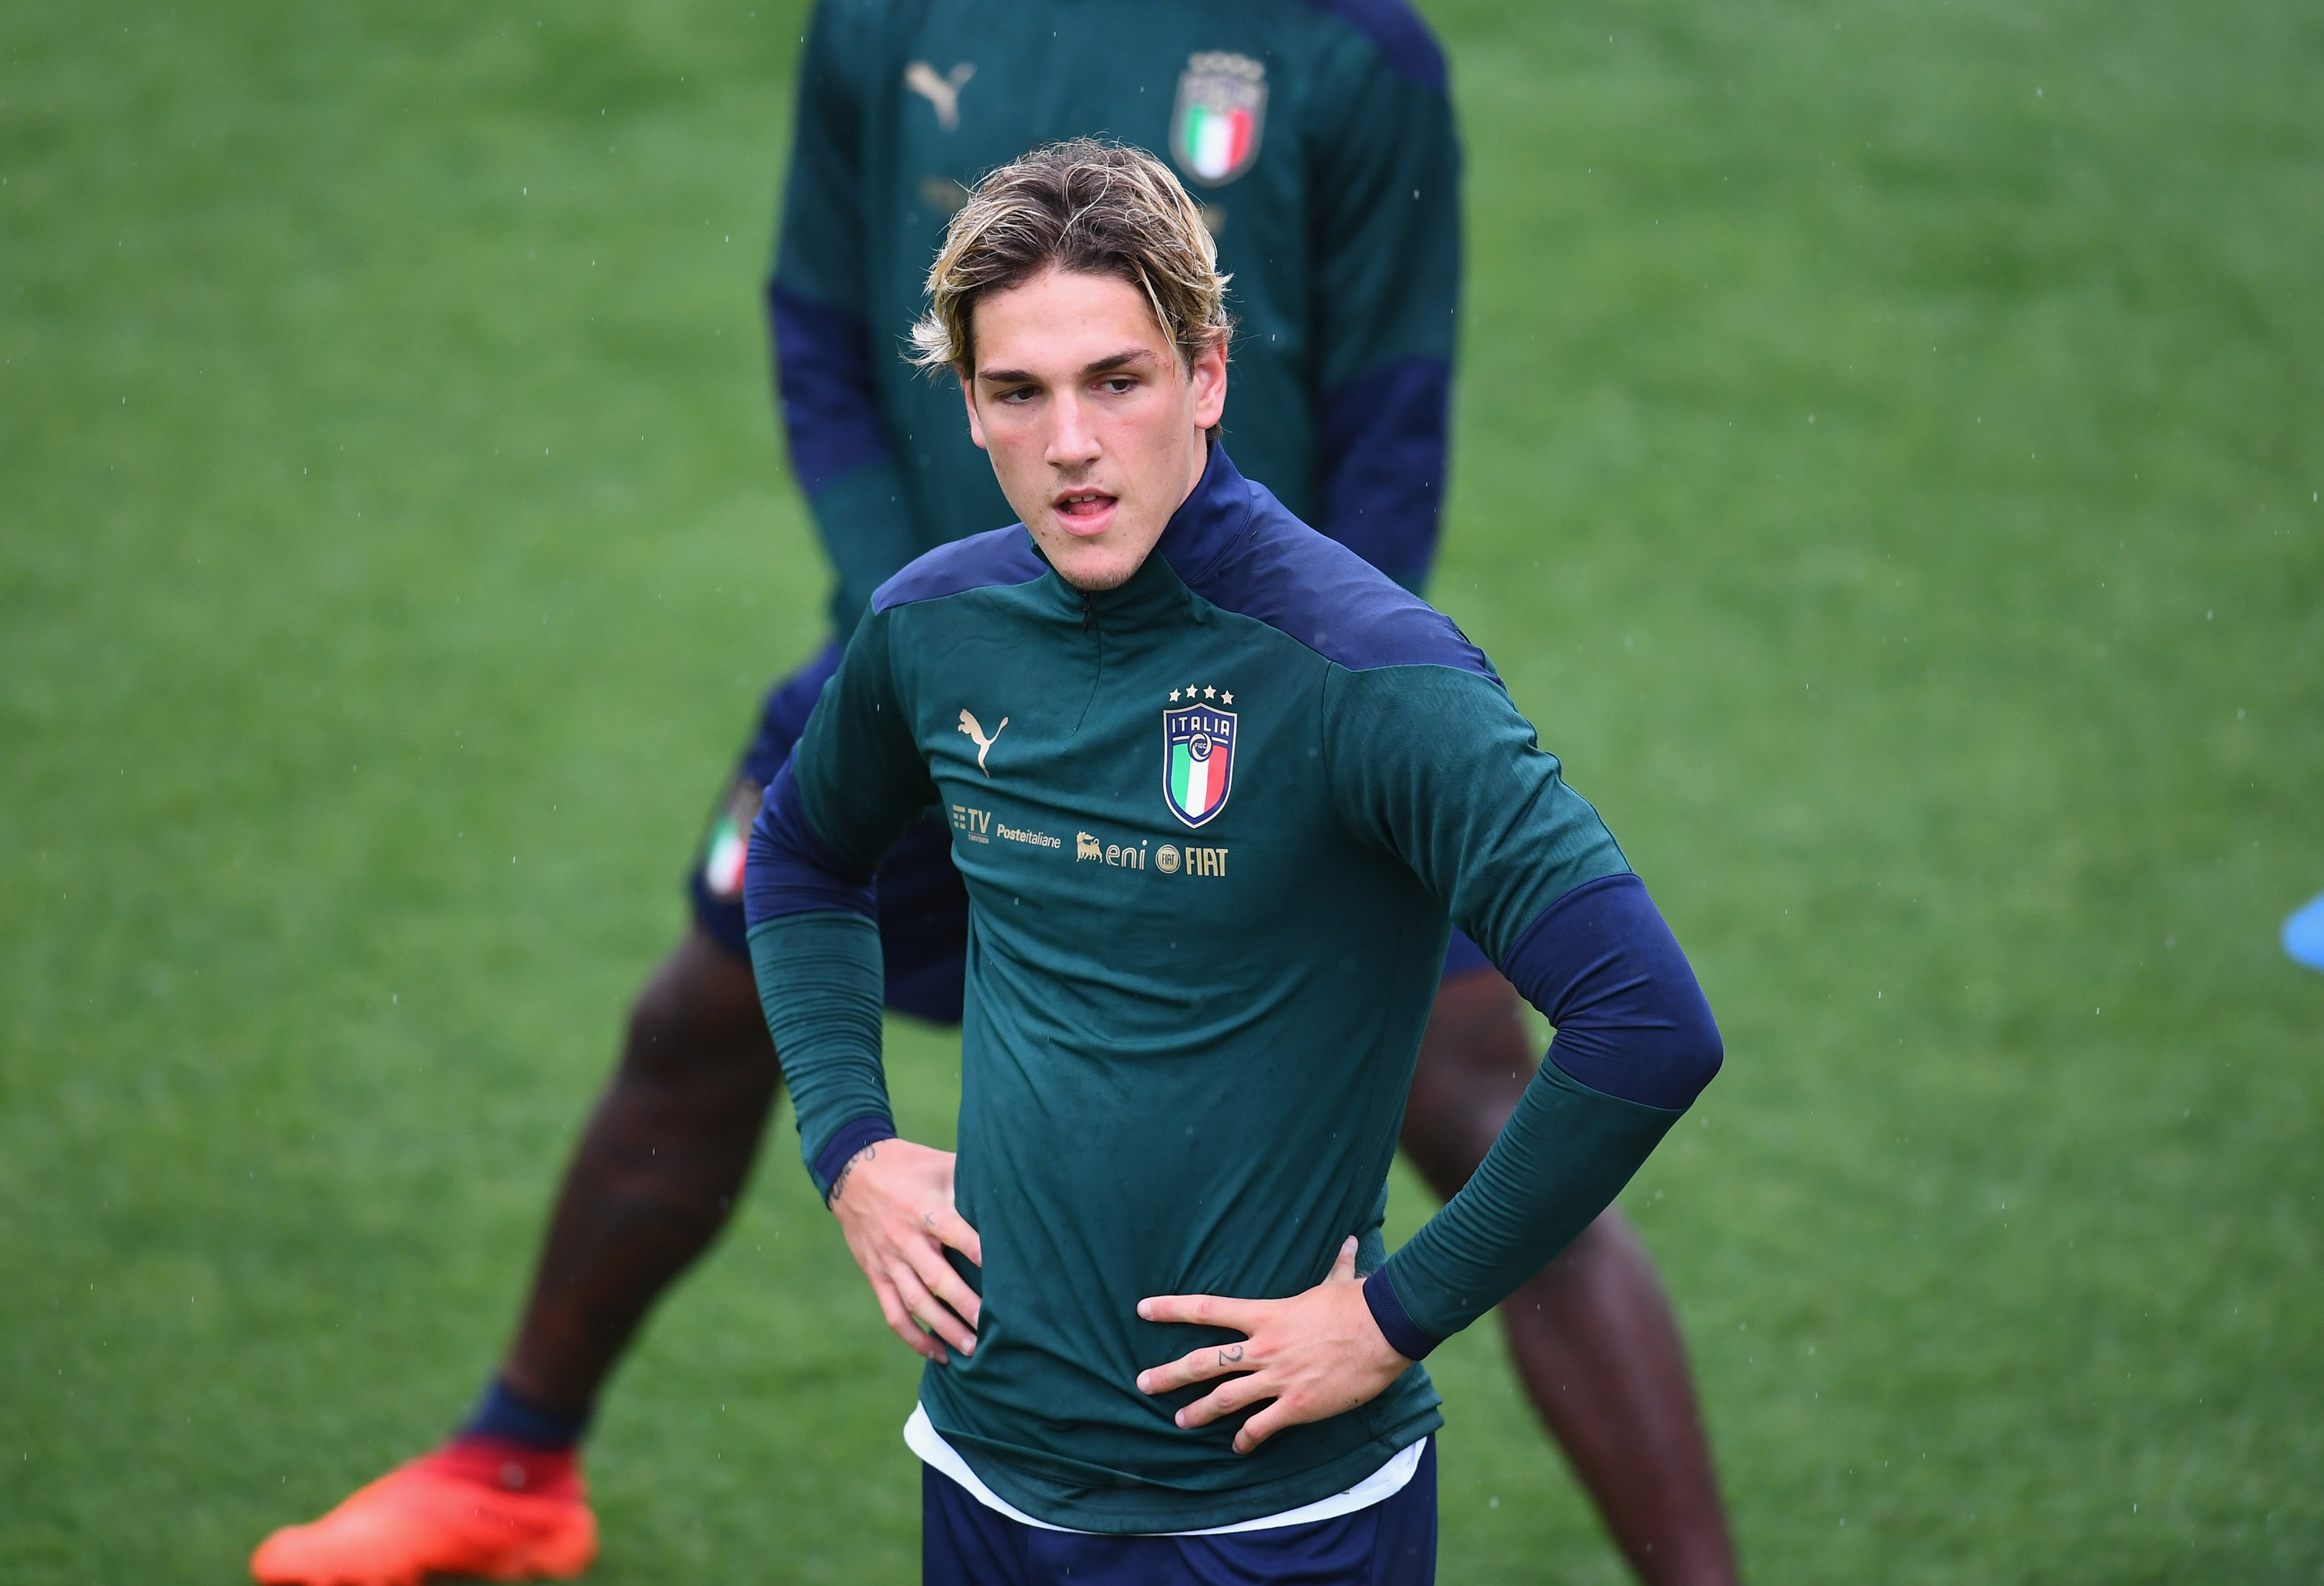 AS Roma confirm that Nicolo Zaniolo has suffered second ACL injury in less than a year